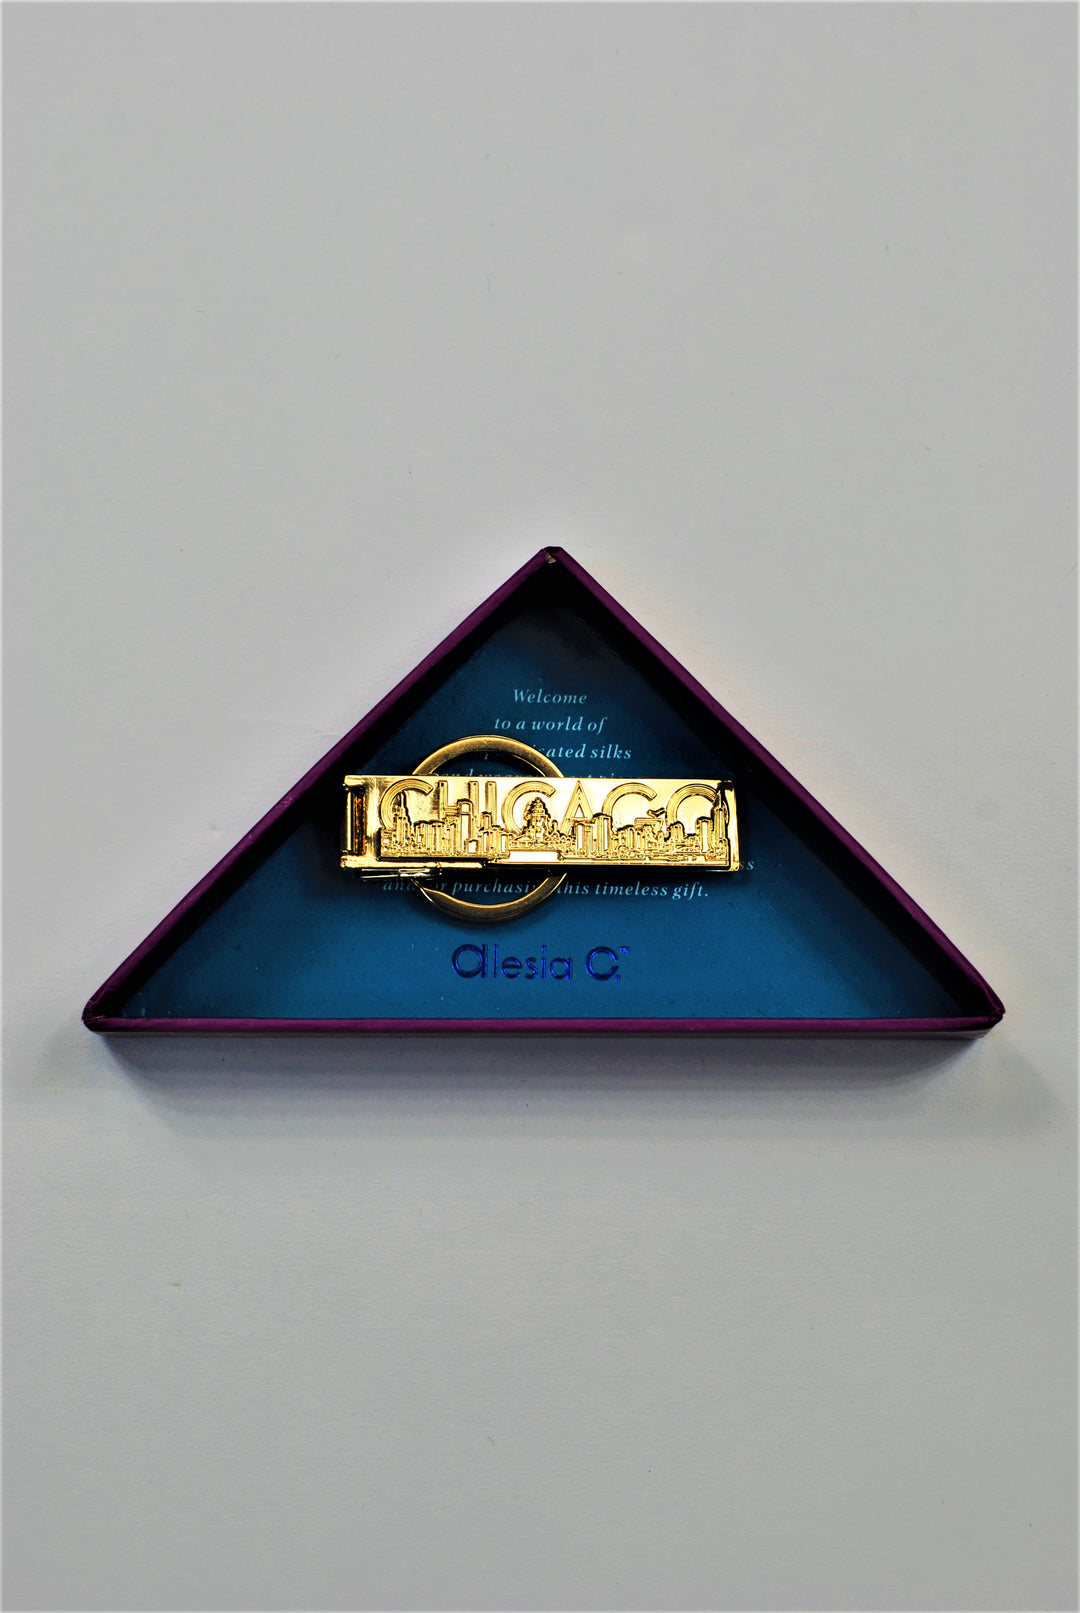 CHICAGO Skyline 3D Fine Art Key Ring Gold Plated by Alesia Chaika